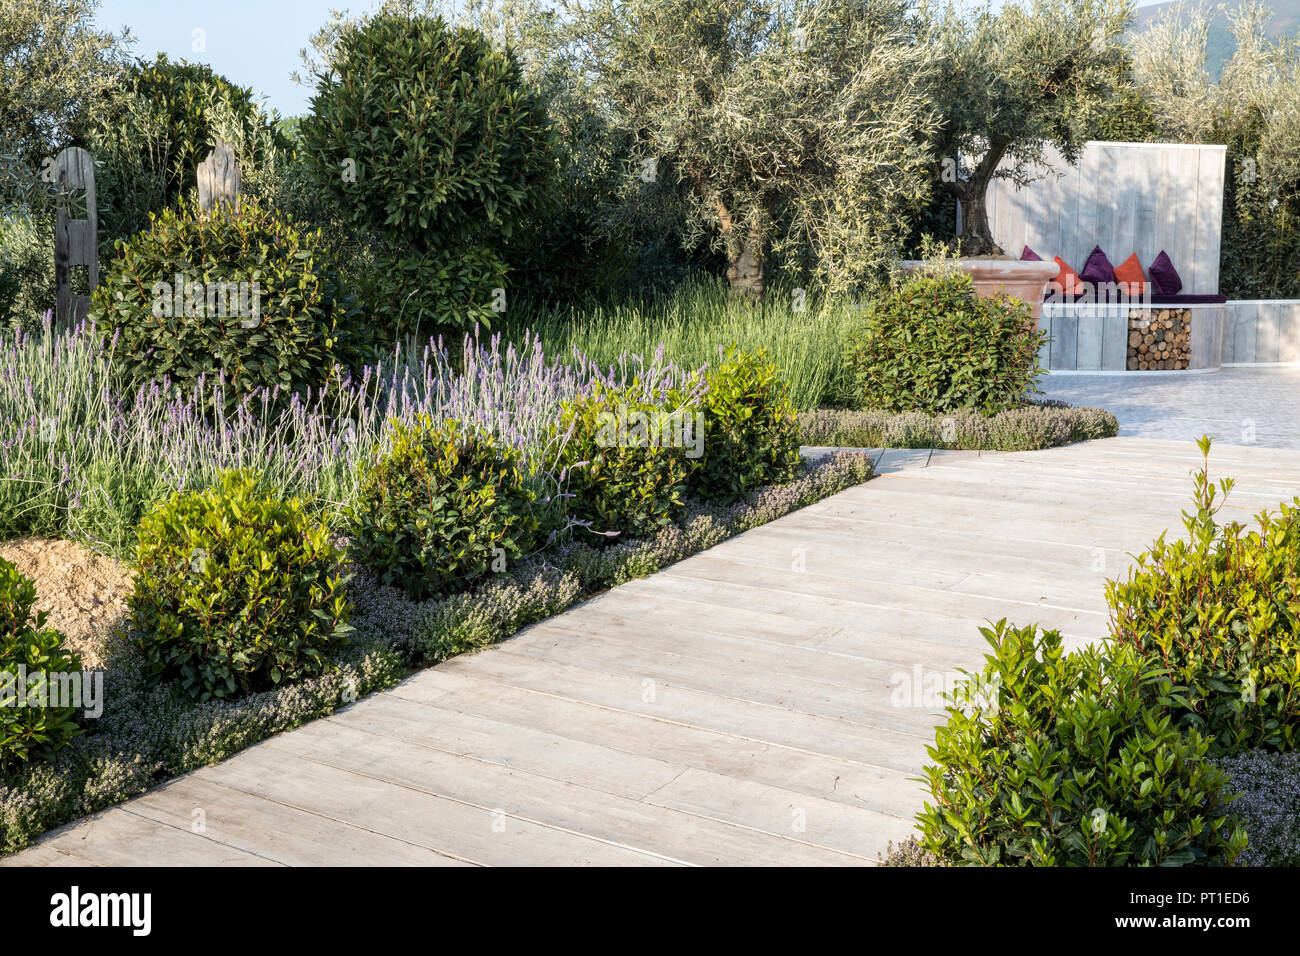 Mediterranean garden with wooden decking path lined with Prunus lusitanica underplanted with Thymus and Lavender Olive trees with outdoor seating area Stock Photo